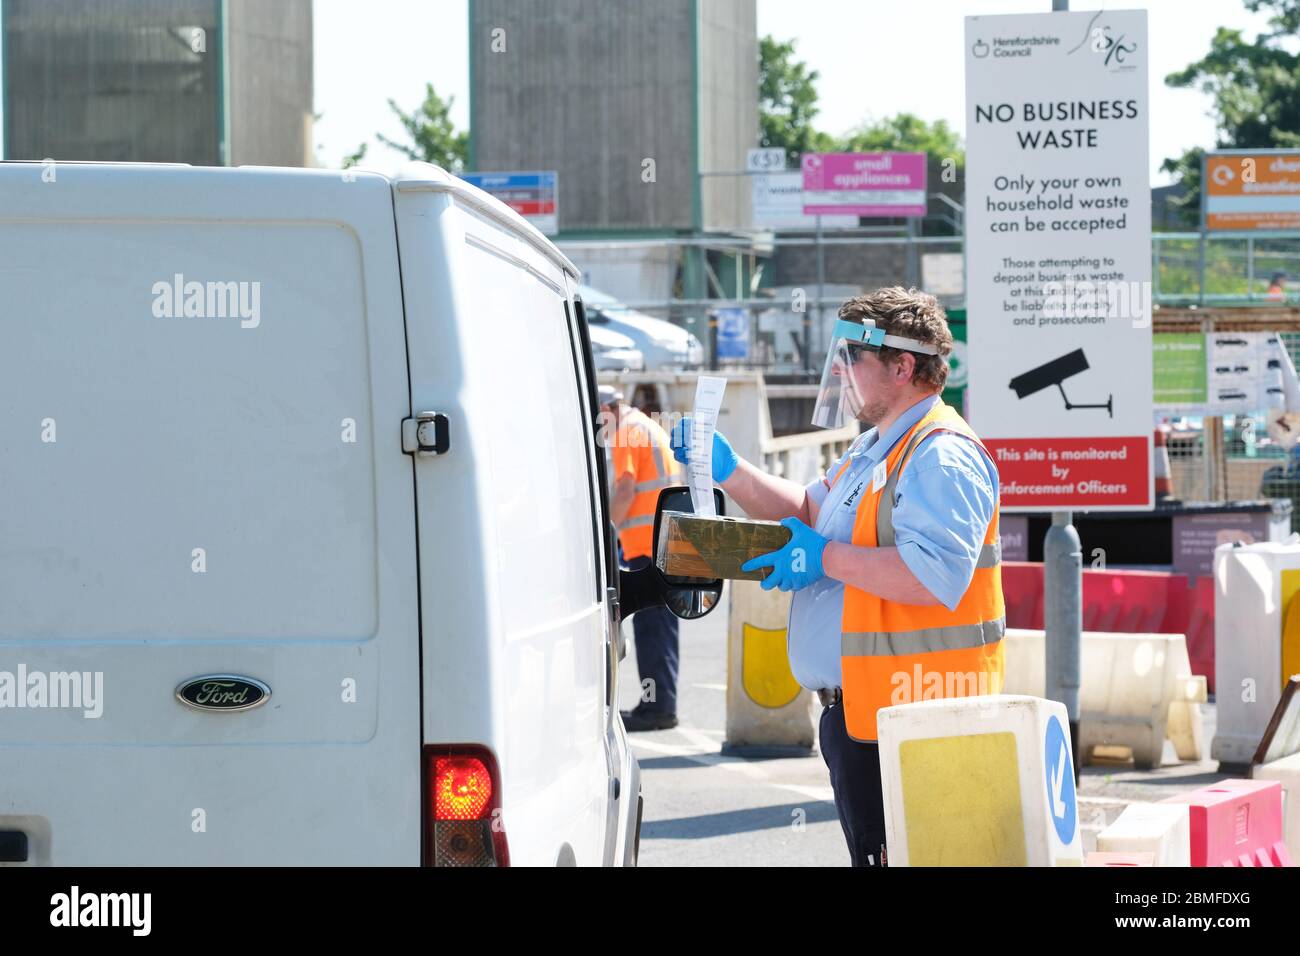 Hereford, Herefordshire UK - Saturday 9th May 2020 - Herefordshire Council has re-opened two recycling centres to the public today across the county. Recycling centre staff wearing protective PPE instruct visitors on the site protocol as they arrive. Recycling Centres have been shut since Britain entered lockdown at the end of March 2020. Photo Steven May / Alamy Live News Stock Photo